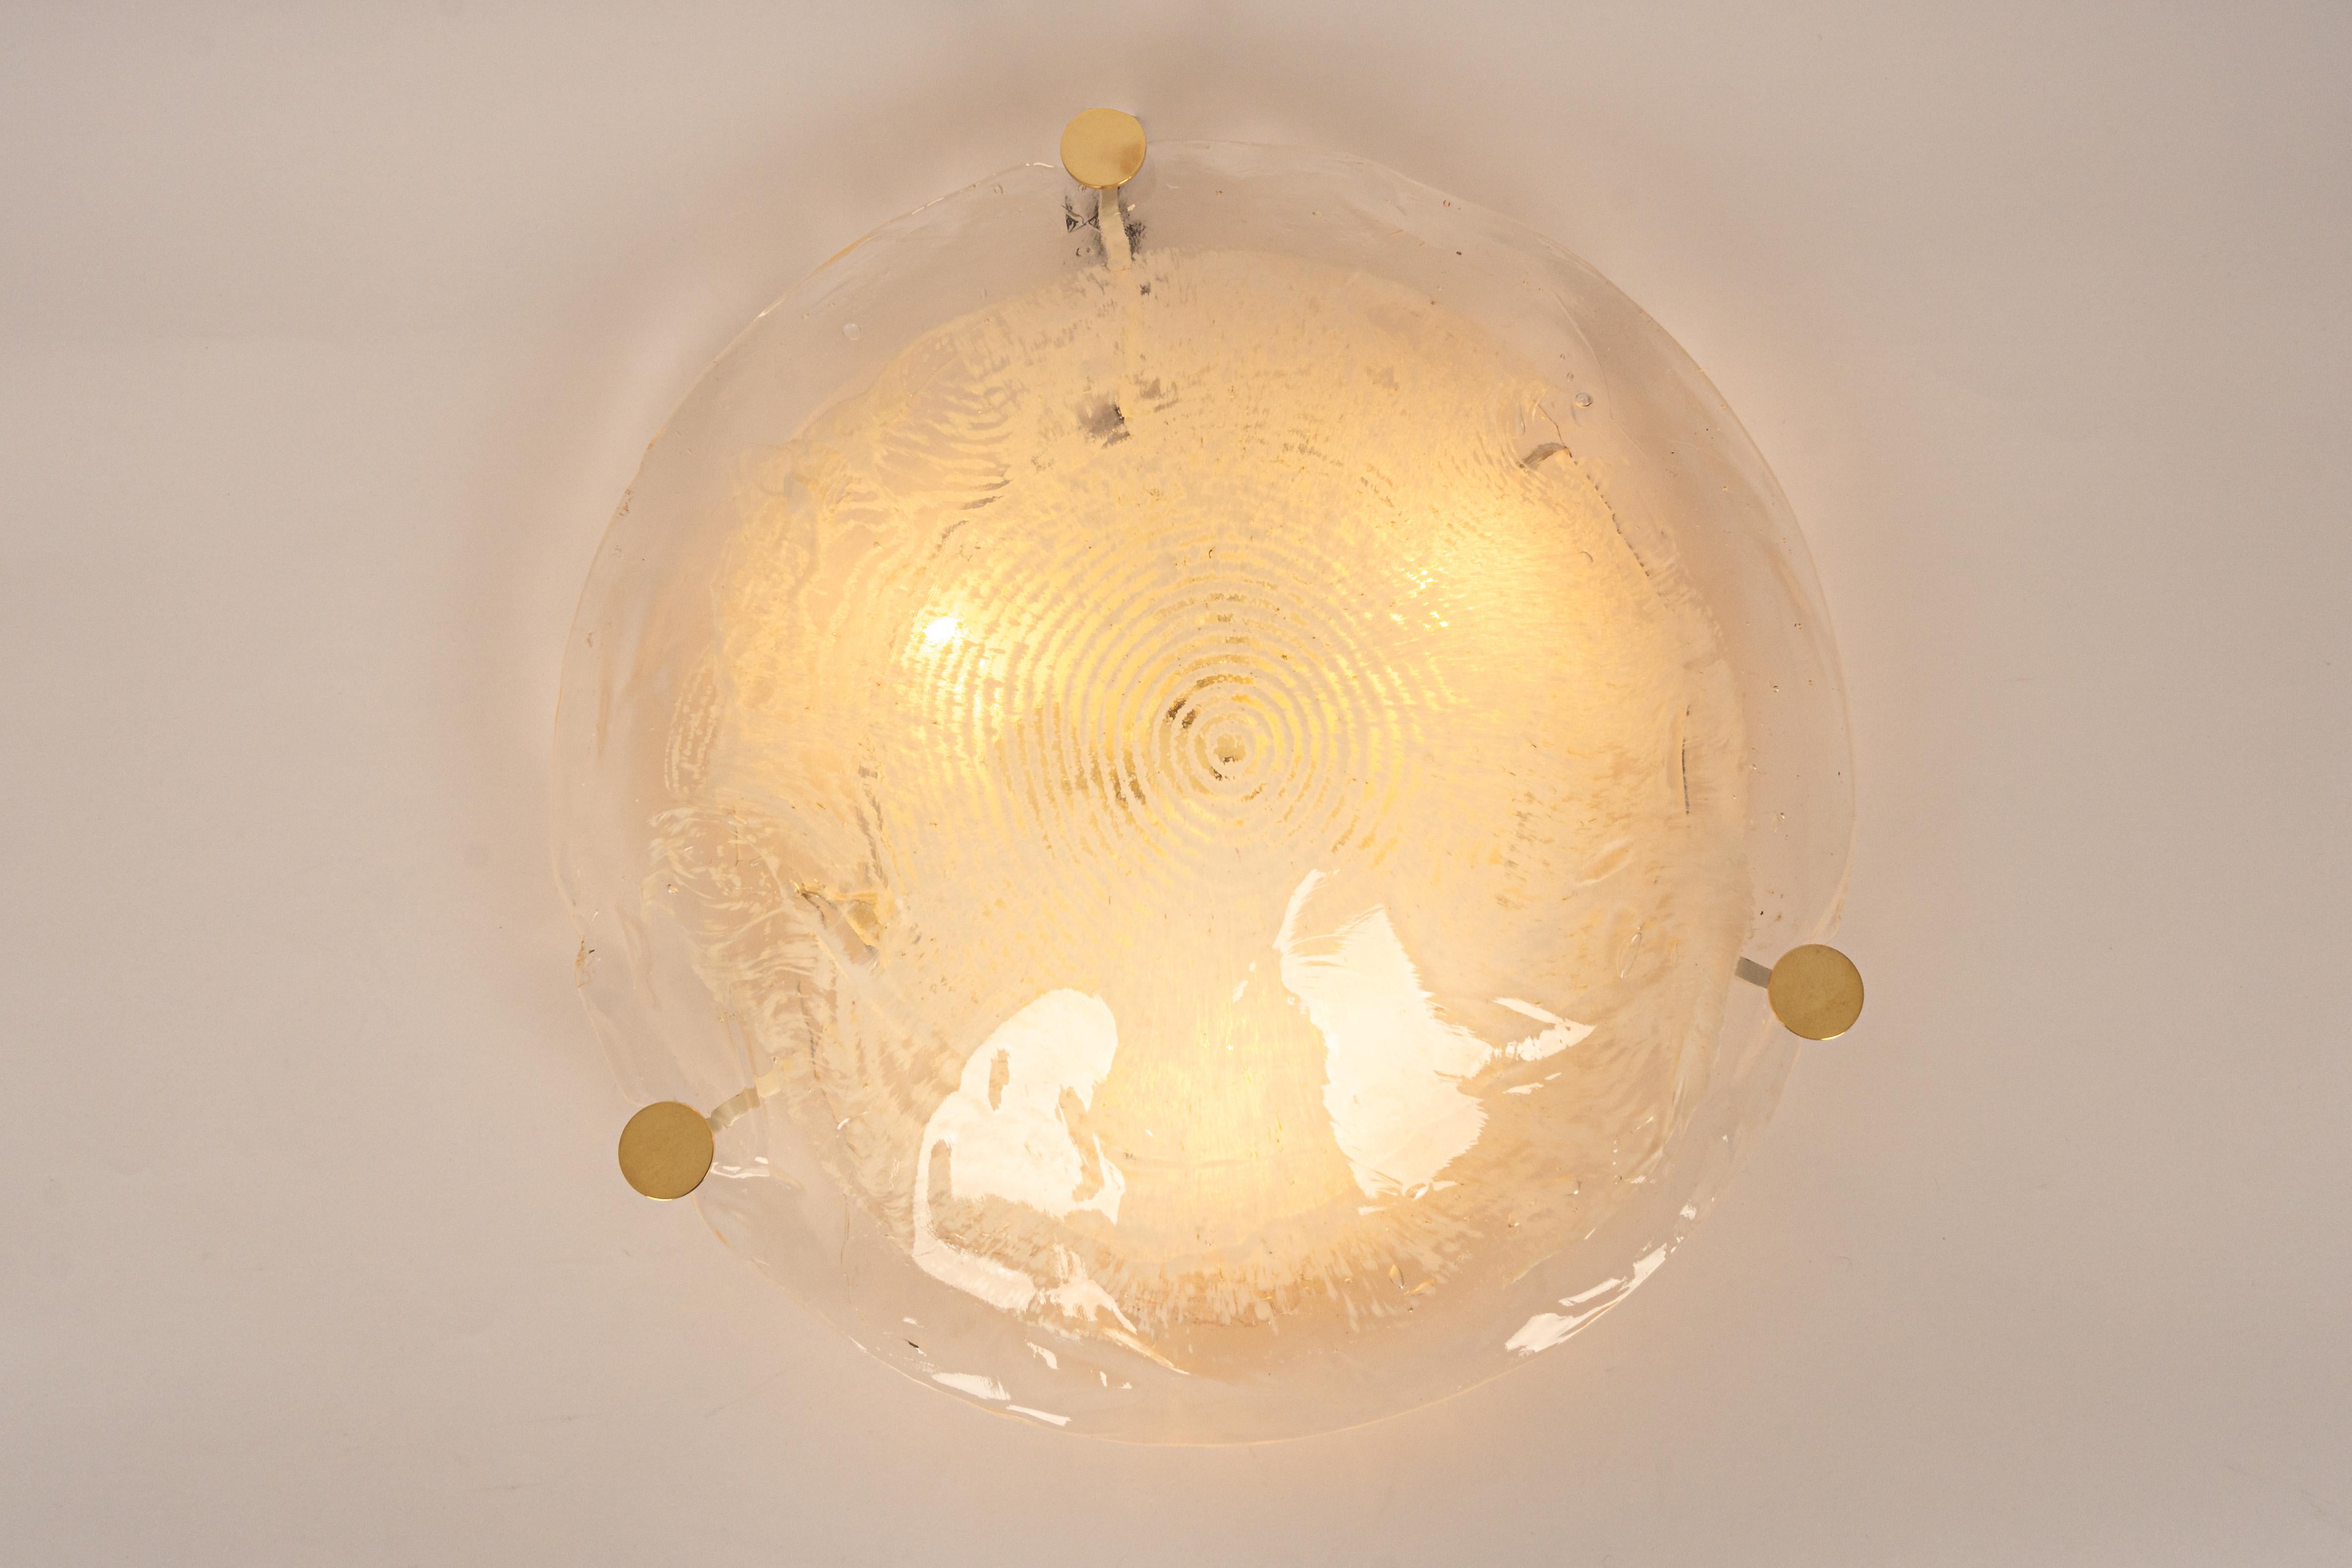 Large flush mount lights designed by Kalmar, Austria, 1970s
Wonderful large organic Murano glass Clear with a light brown tone.
High quality and in very good condition. Cleaned, well-wired, and ready to use.
Model: Undine

The fixture requires